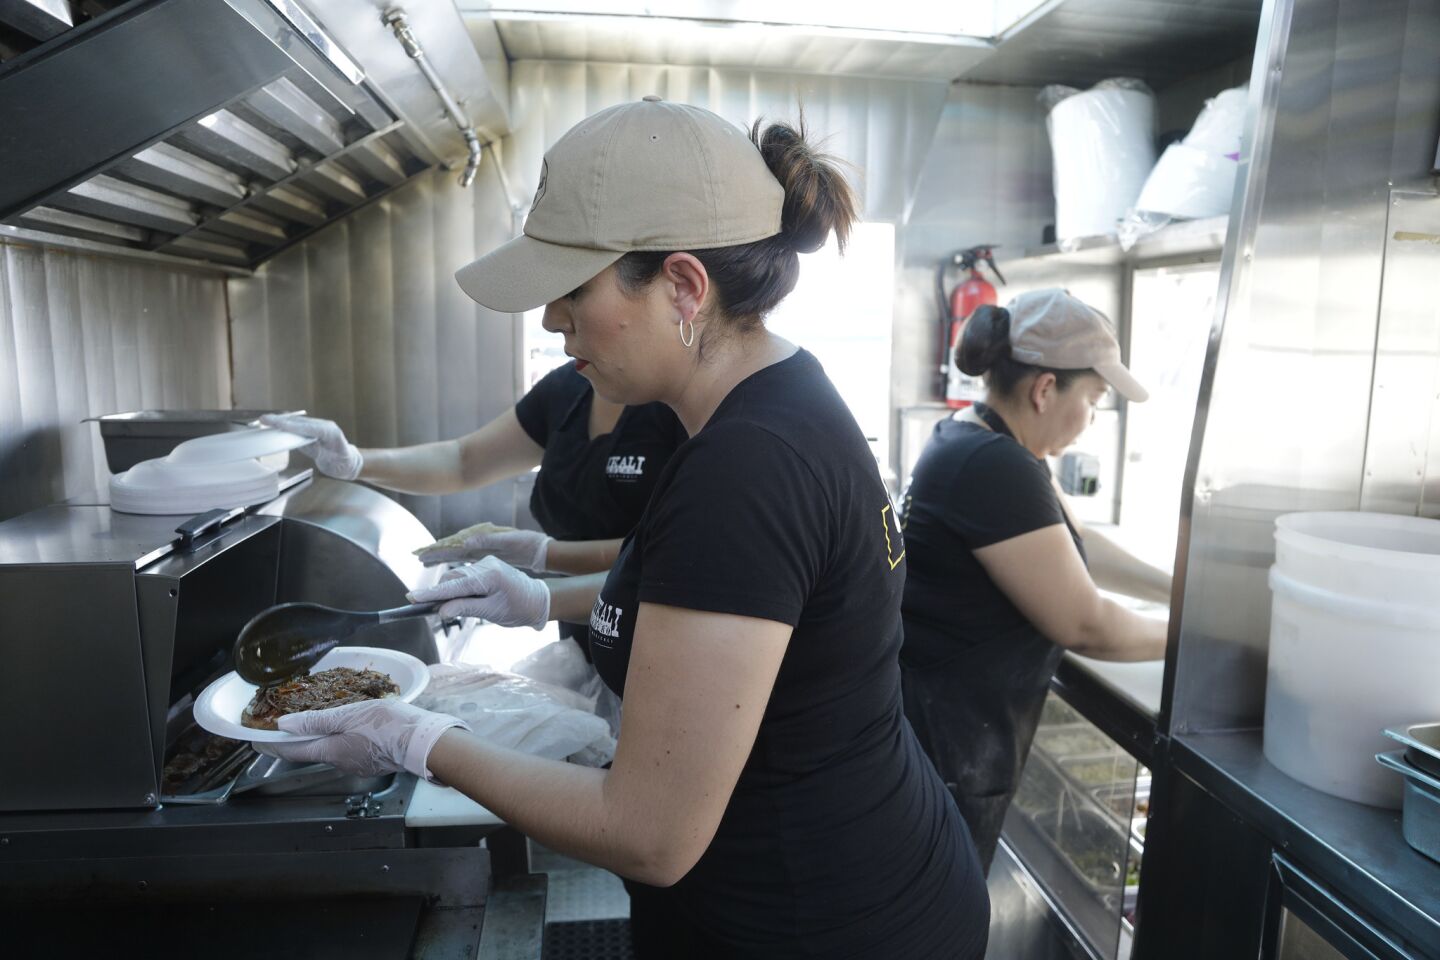 Ana Perez prepares a barbacoa vampiro at her family-owned taco truck Asadero Chikali. For the past three months, they've set up at an auto dealership lot on South Atlantic Boulevard in East Los Angeles serving breakfast, lunch and dinner.